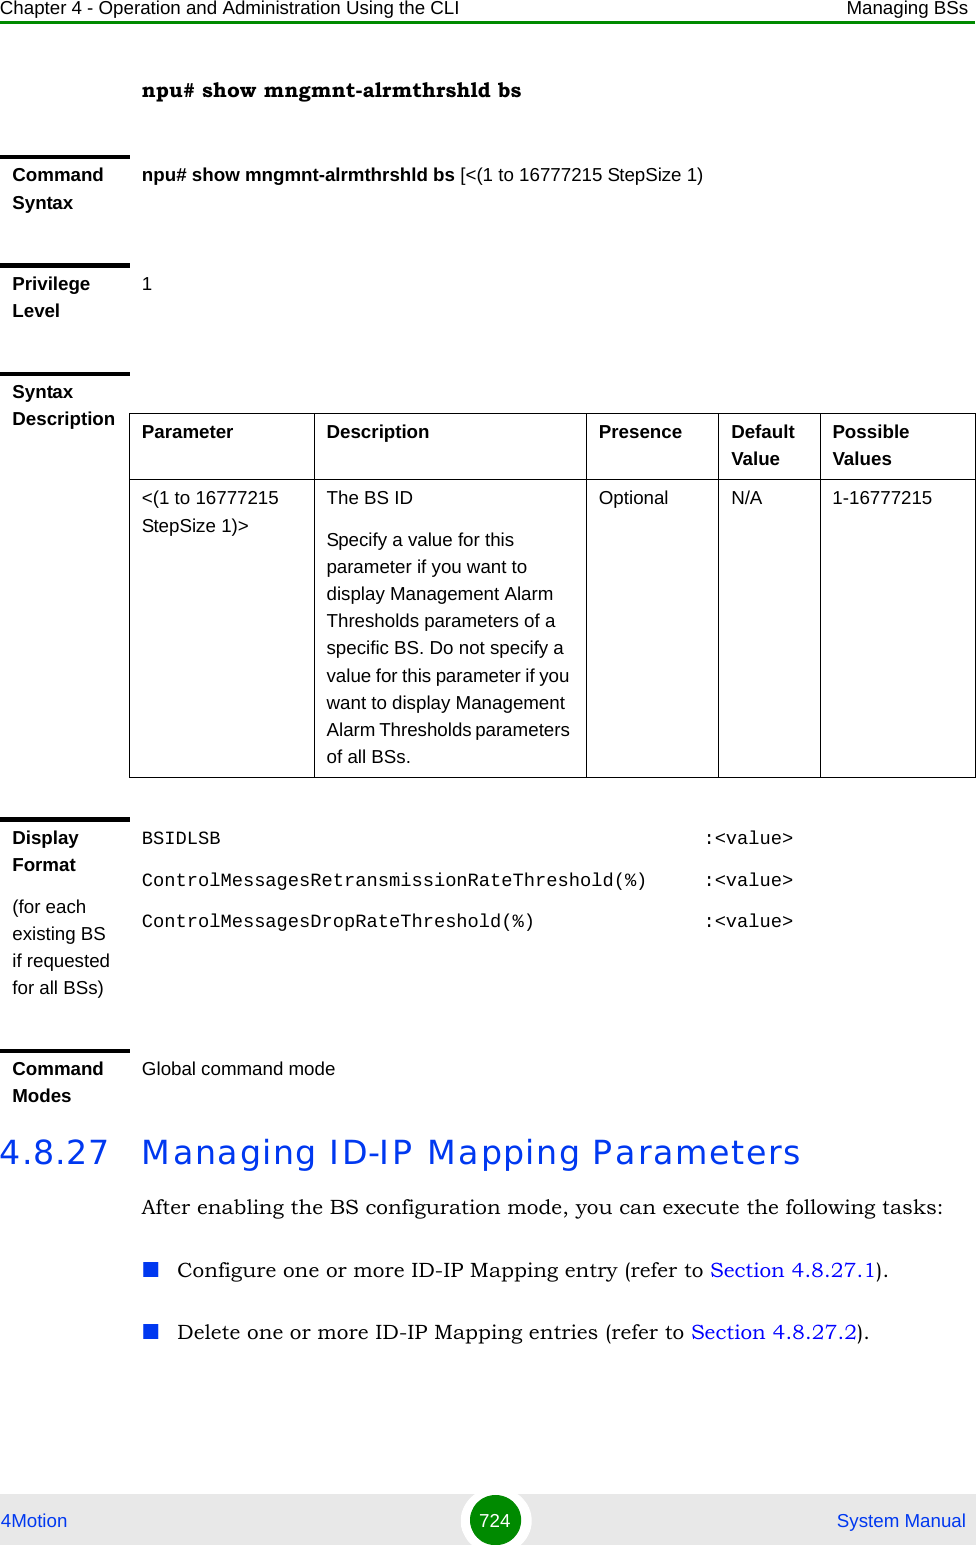 Chapter 4 - Operation and Administration Using the CLI Managing BSs4Motion 724  System Manualnpu# show mngmnt-alrmthrshld bs4.8.27 Managing ID-IP Mapping ParametersAfter enabling the BS configuration mode, you can execute the following tasks:Configure one or more ID-IP Mapping entry (refer to Section 4.8.27.1).Delete one or more ID-IP Mapping entries (refer to Section 4.8.27.2).Command Syntaxnpu# show mngmnt-alrmthrshld bs [&lt;(1 to 16777215 StepSize 1)Privilege Level1Syntax Description Parameter Description Presence Default ValuePossible Values&lt;(1 to 16777215 StepSize 1)&gt;The BS ID Specify a value for this parameter if you want to display Management Alarm Thresholds parameters of a specific BS. Do not specify a value for this parameter if you want to display Management Alarm Thresholds parameters of all BSs.Optional N/A 1-16777215Display Format(for each existing BS if requested for all BSs)BSIDLSB                                           :&lt;value&gt;ControlMessagesRetransmissionRateThreshold(%)     :&lt;value&gt;ControlMessagesDropRateThreshold(%)               :&lt;value&gt;Command ModesGlobal command mode